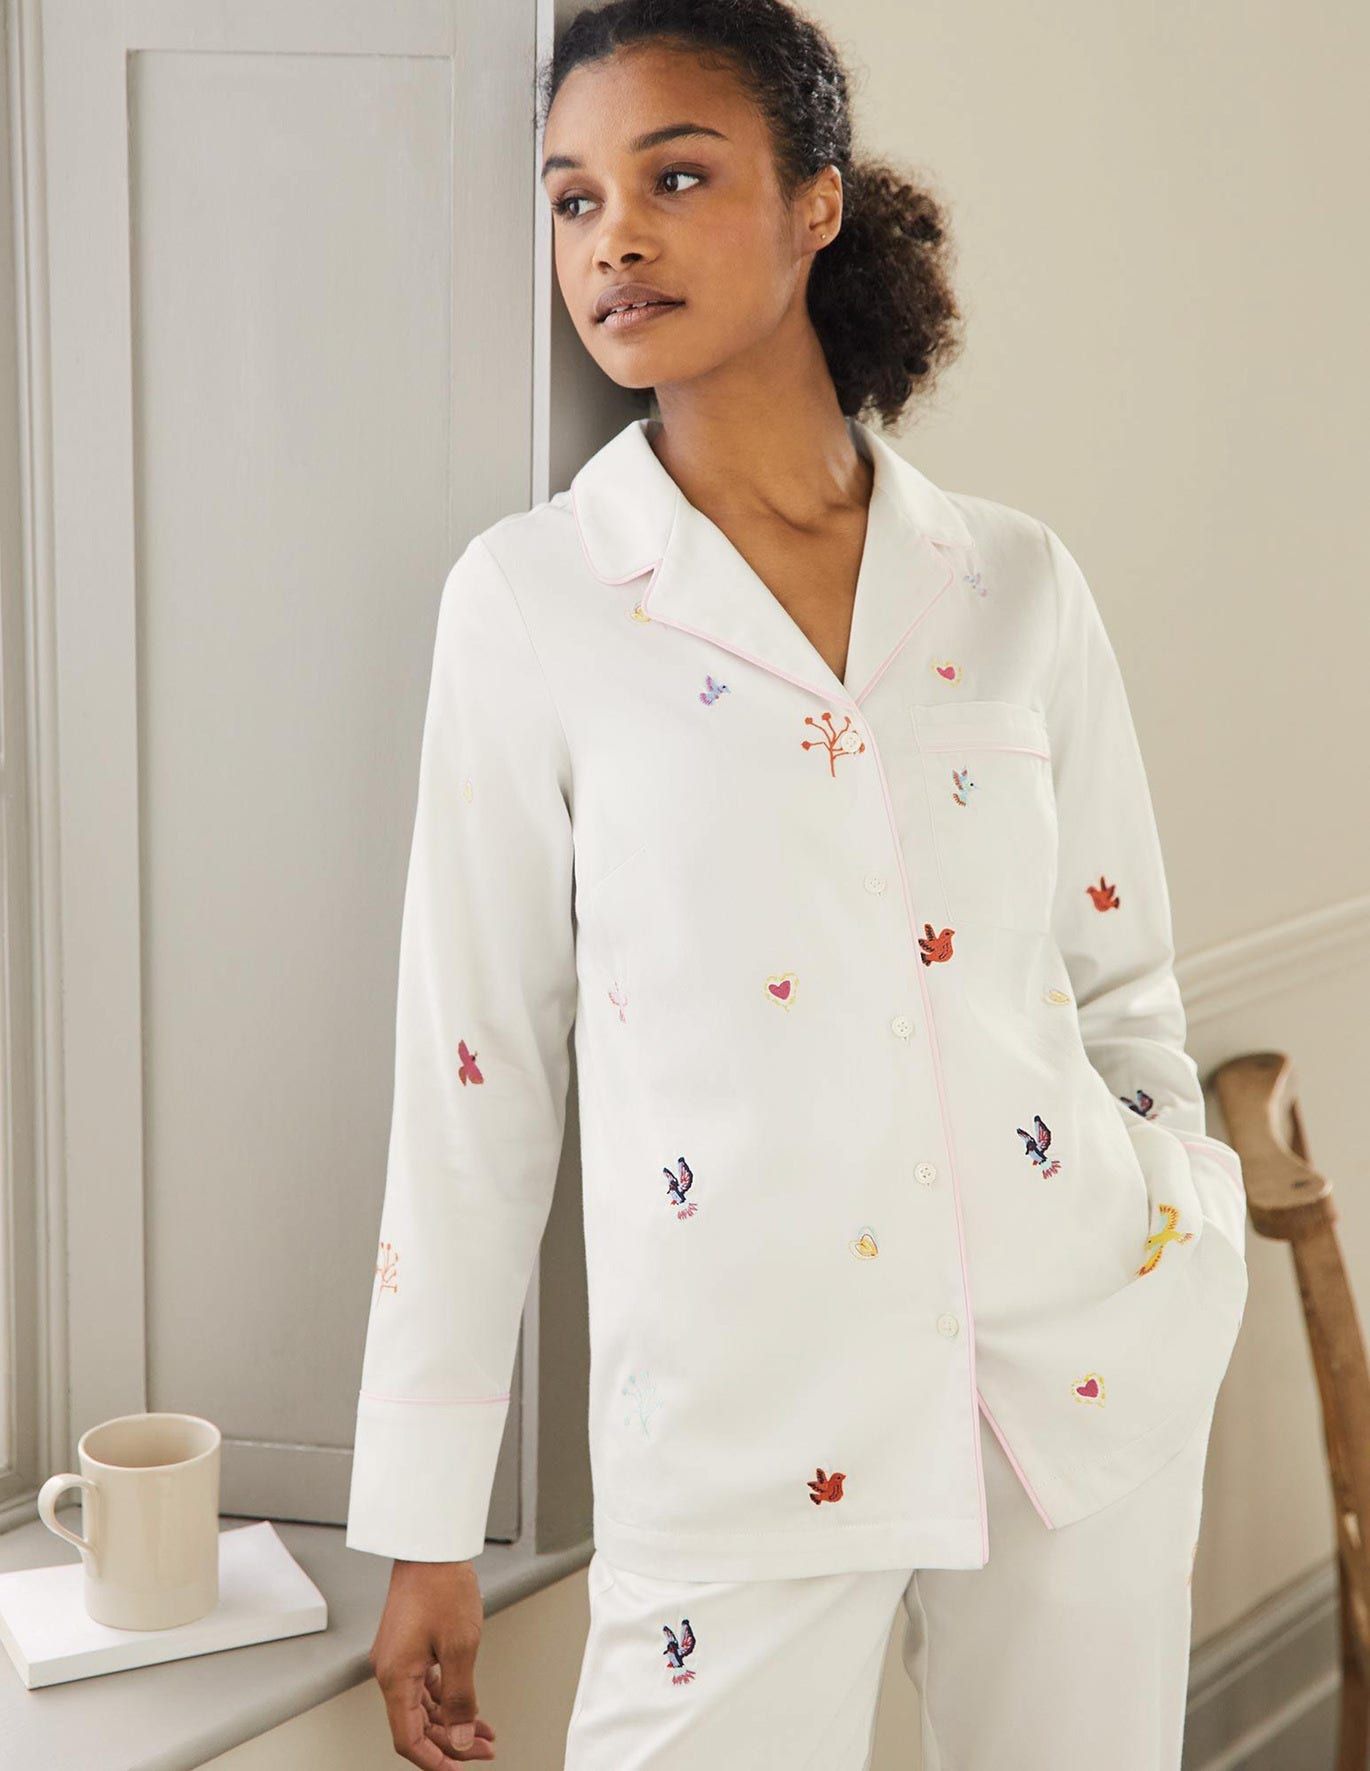 Boden is selling the perfect pyjamas for spring/summer